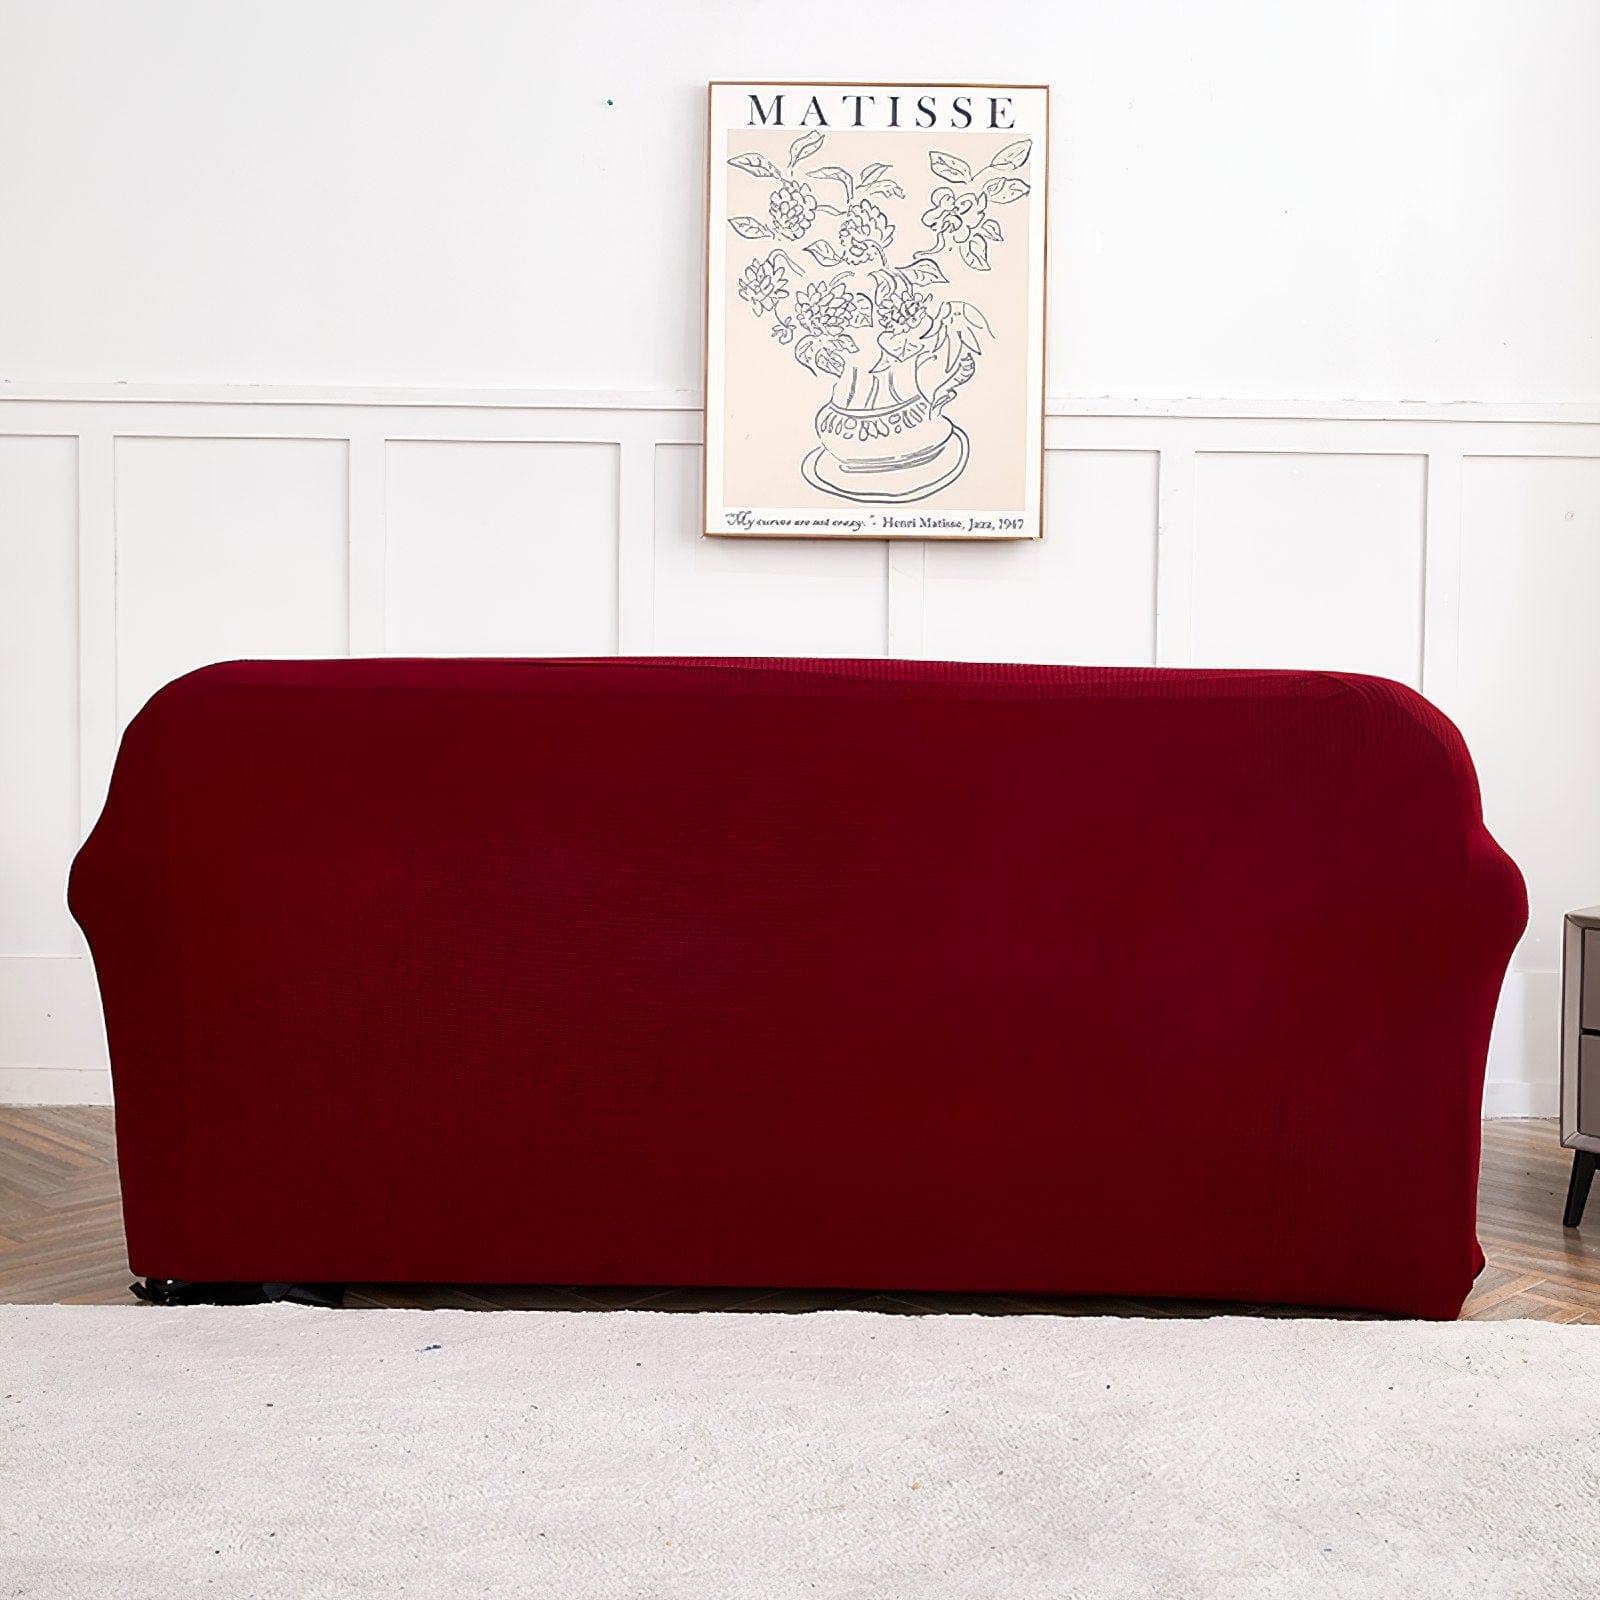 Red wine - 100% Waterproof and Ultra Resistant Stretch Armchair and Sofa Covers - The Sofa Cover House